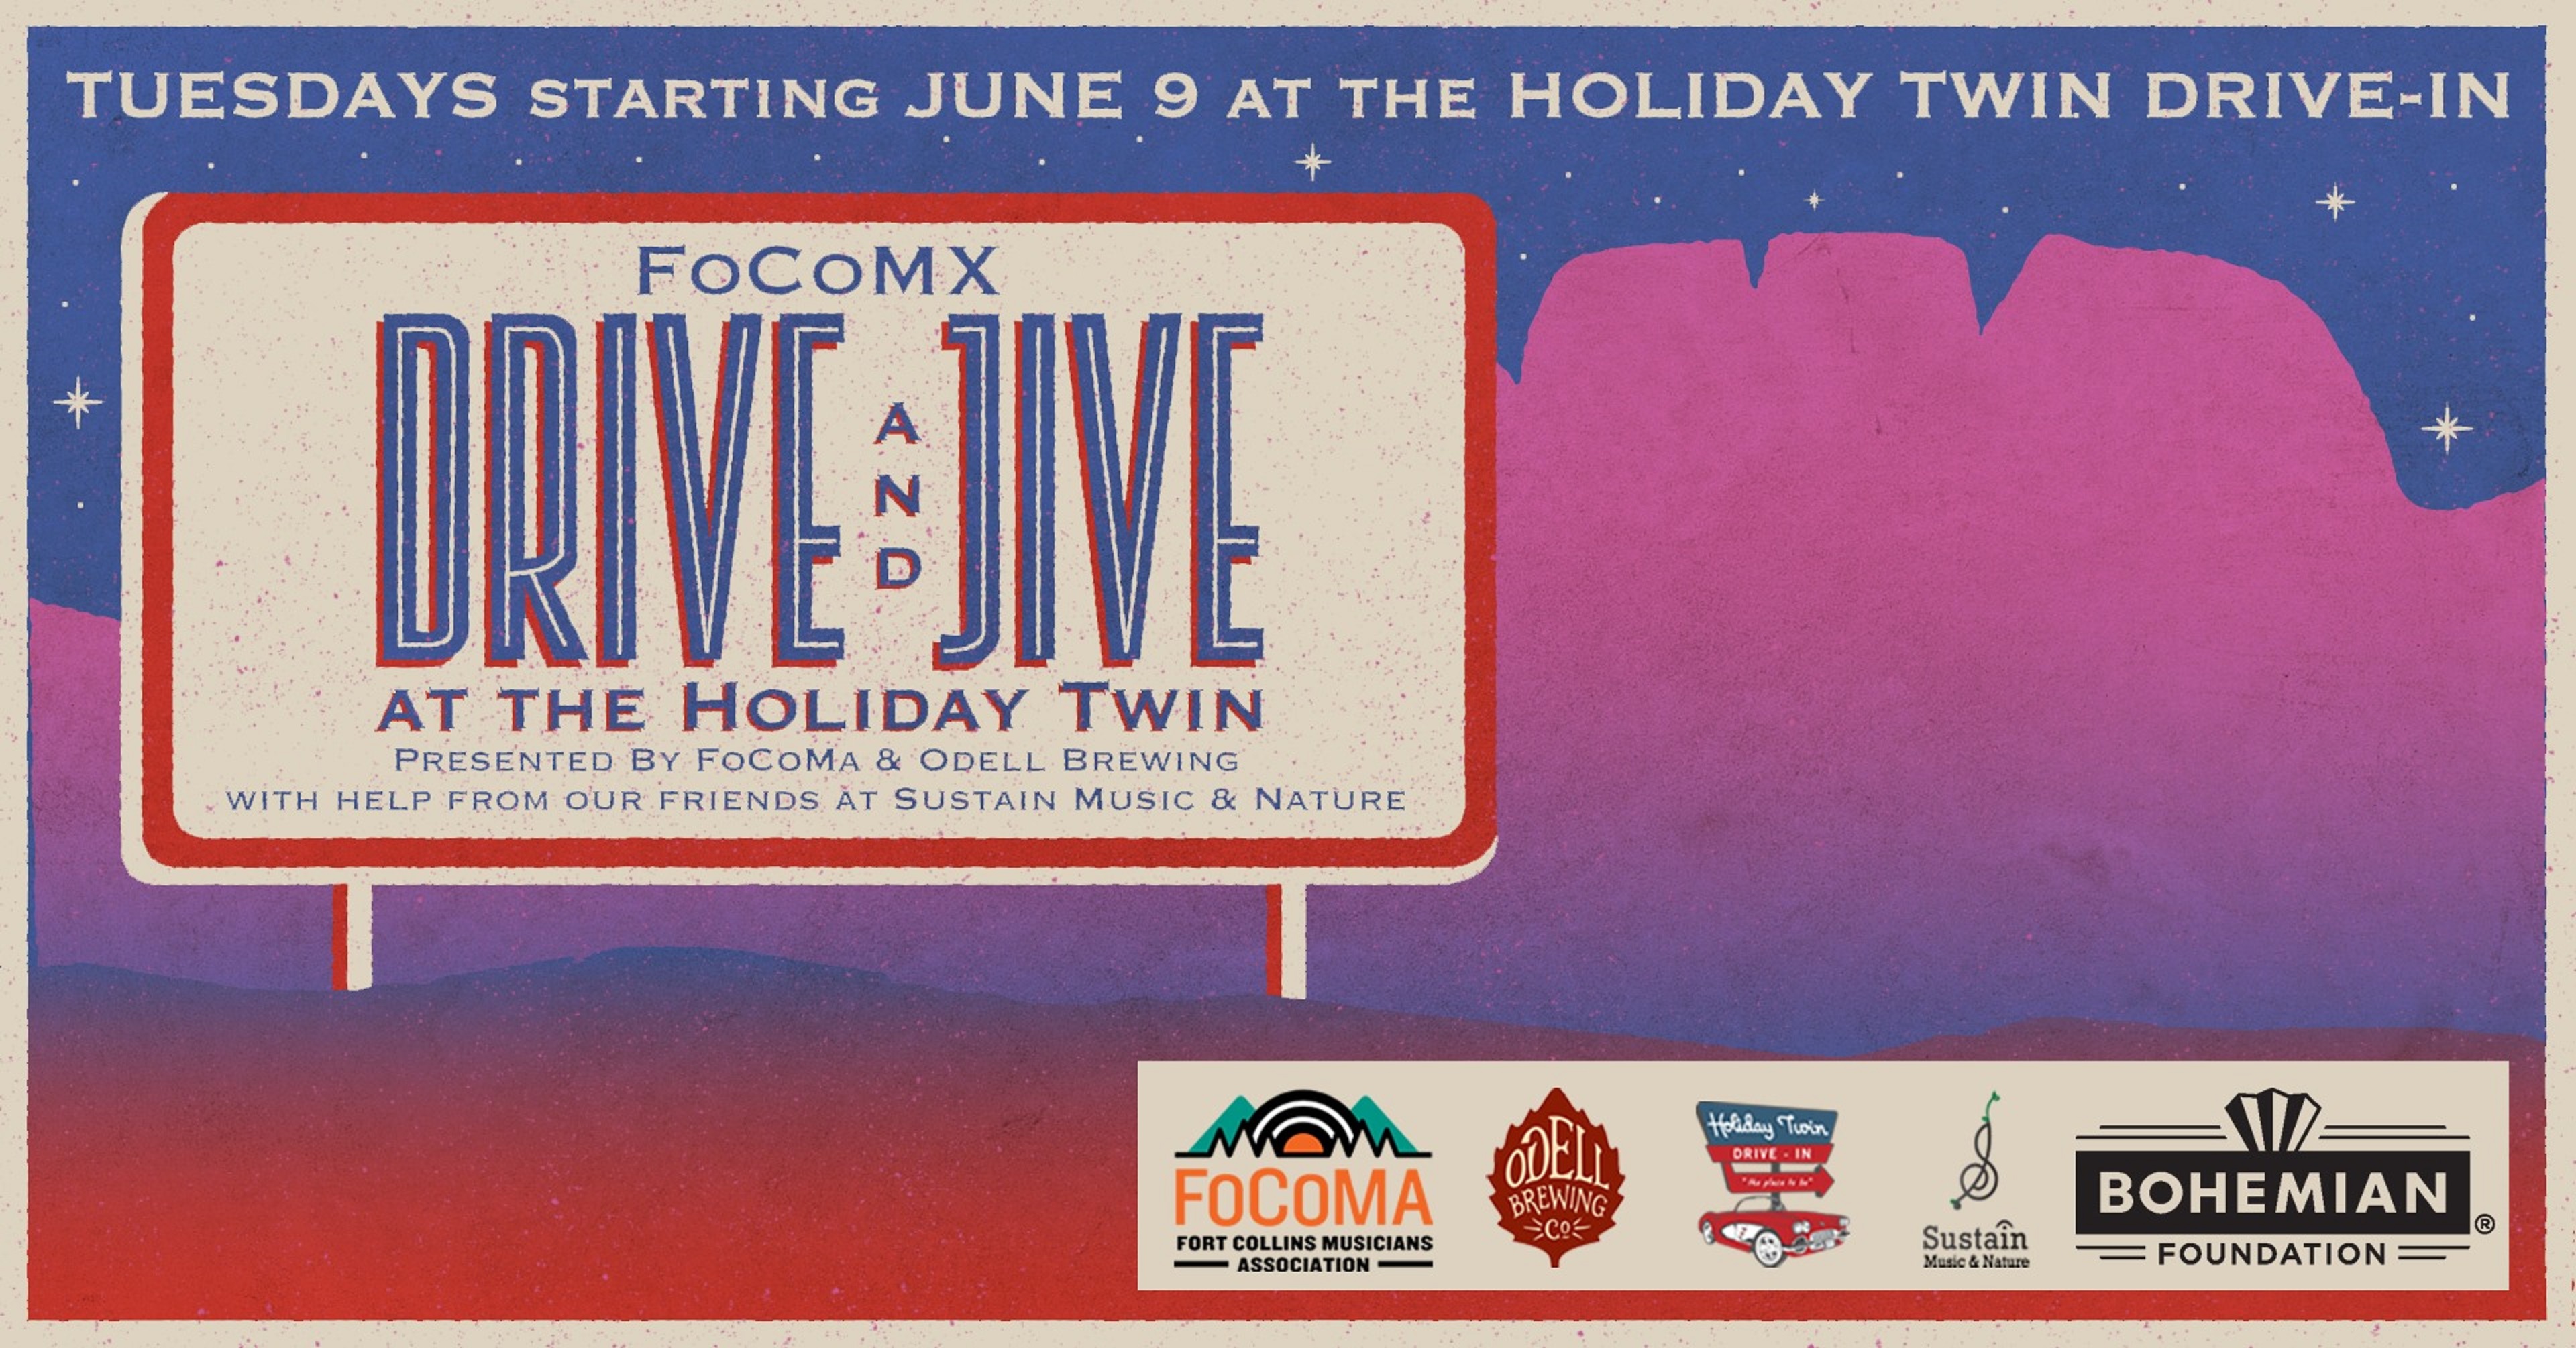 Northern Colorado Music nonprofit bands together with partners to offer safe live music concert series at the Drive- In